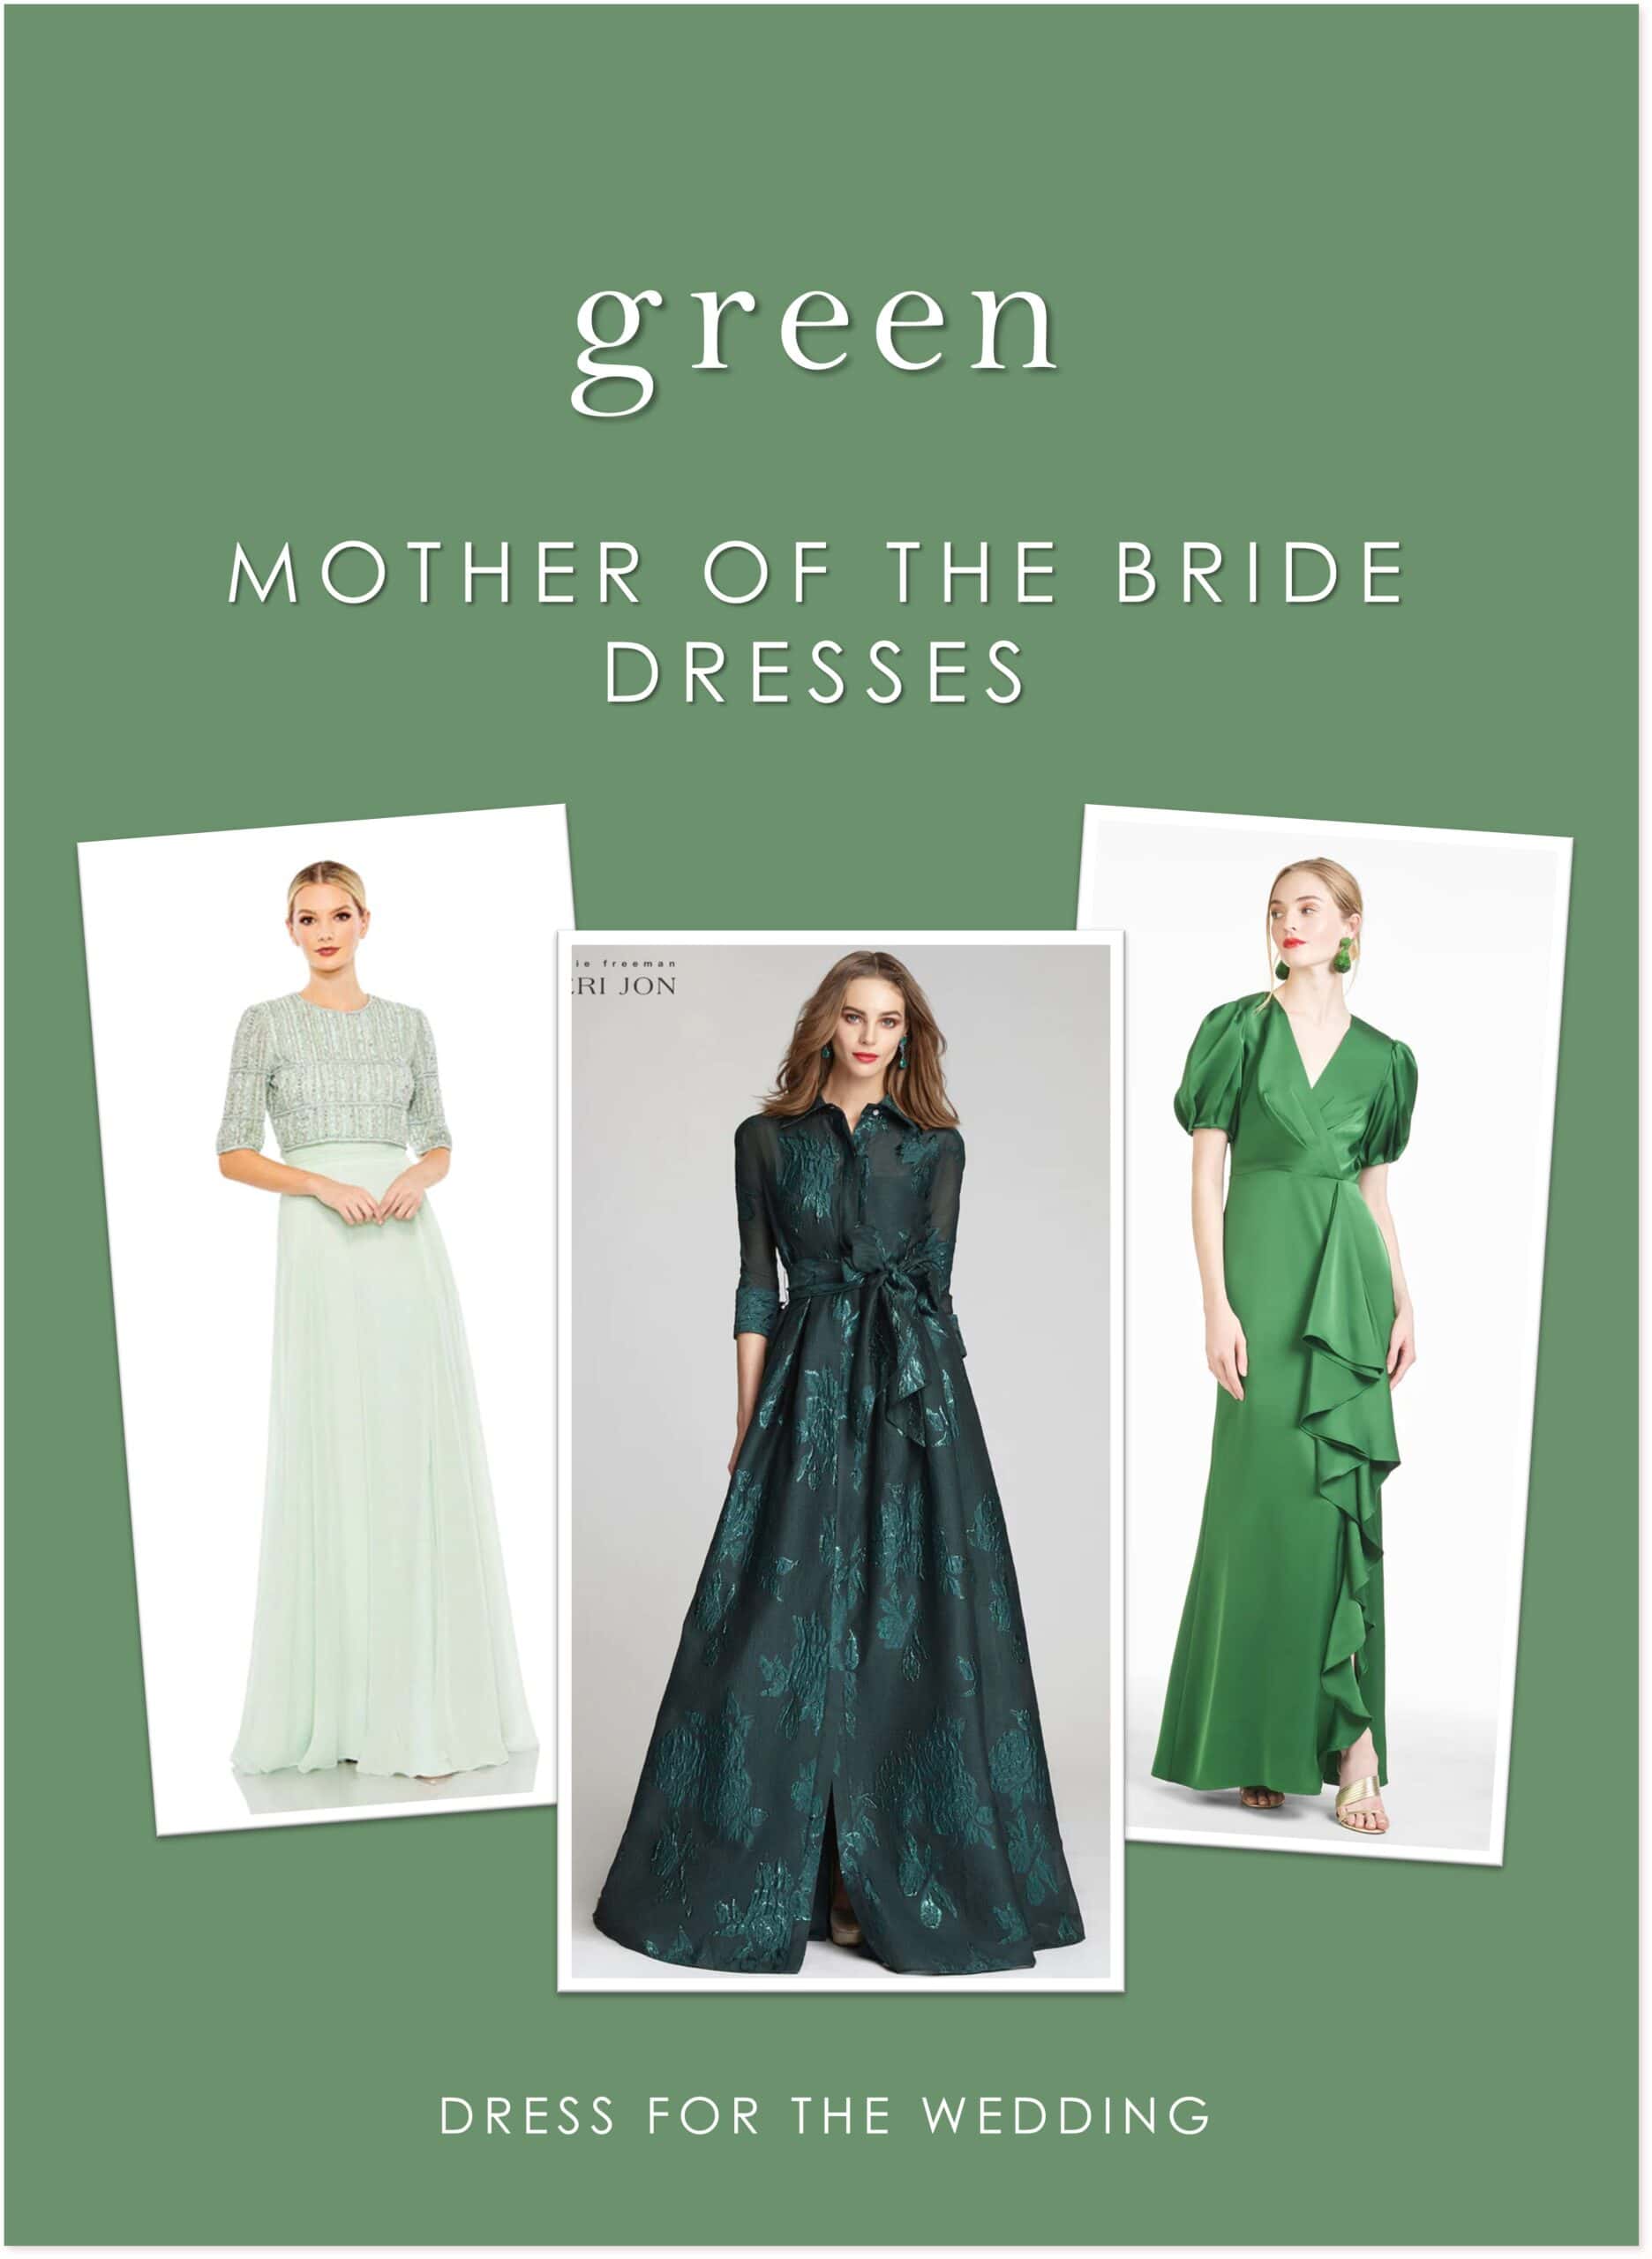 Buy MARSEN Lace Chiffon Bridesmaid Dresses Long A-line Evening Formal Gowns  Appliques for Womens 2019 Dark Green Size 18 at Amazon.in